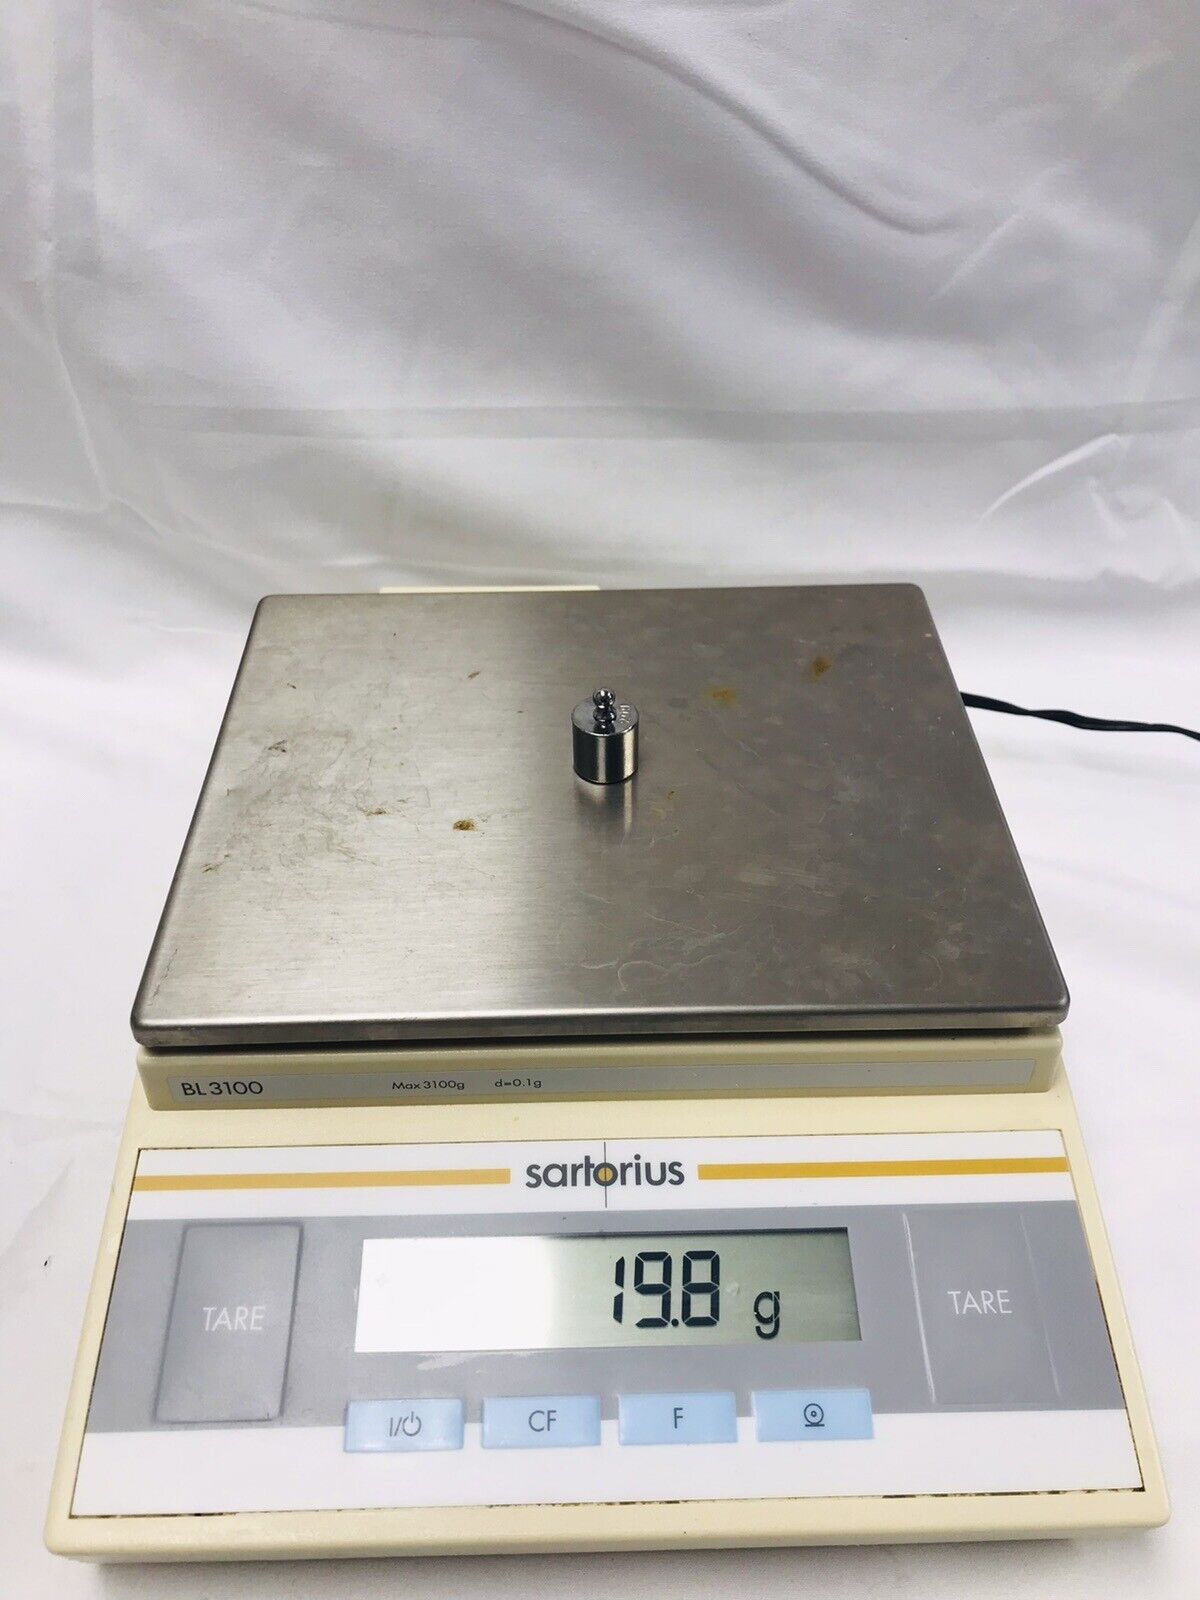 Sartorius BL 3100 Digital Lab Scale with Power Supply Tested Working Video